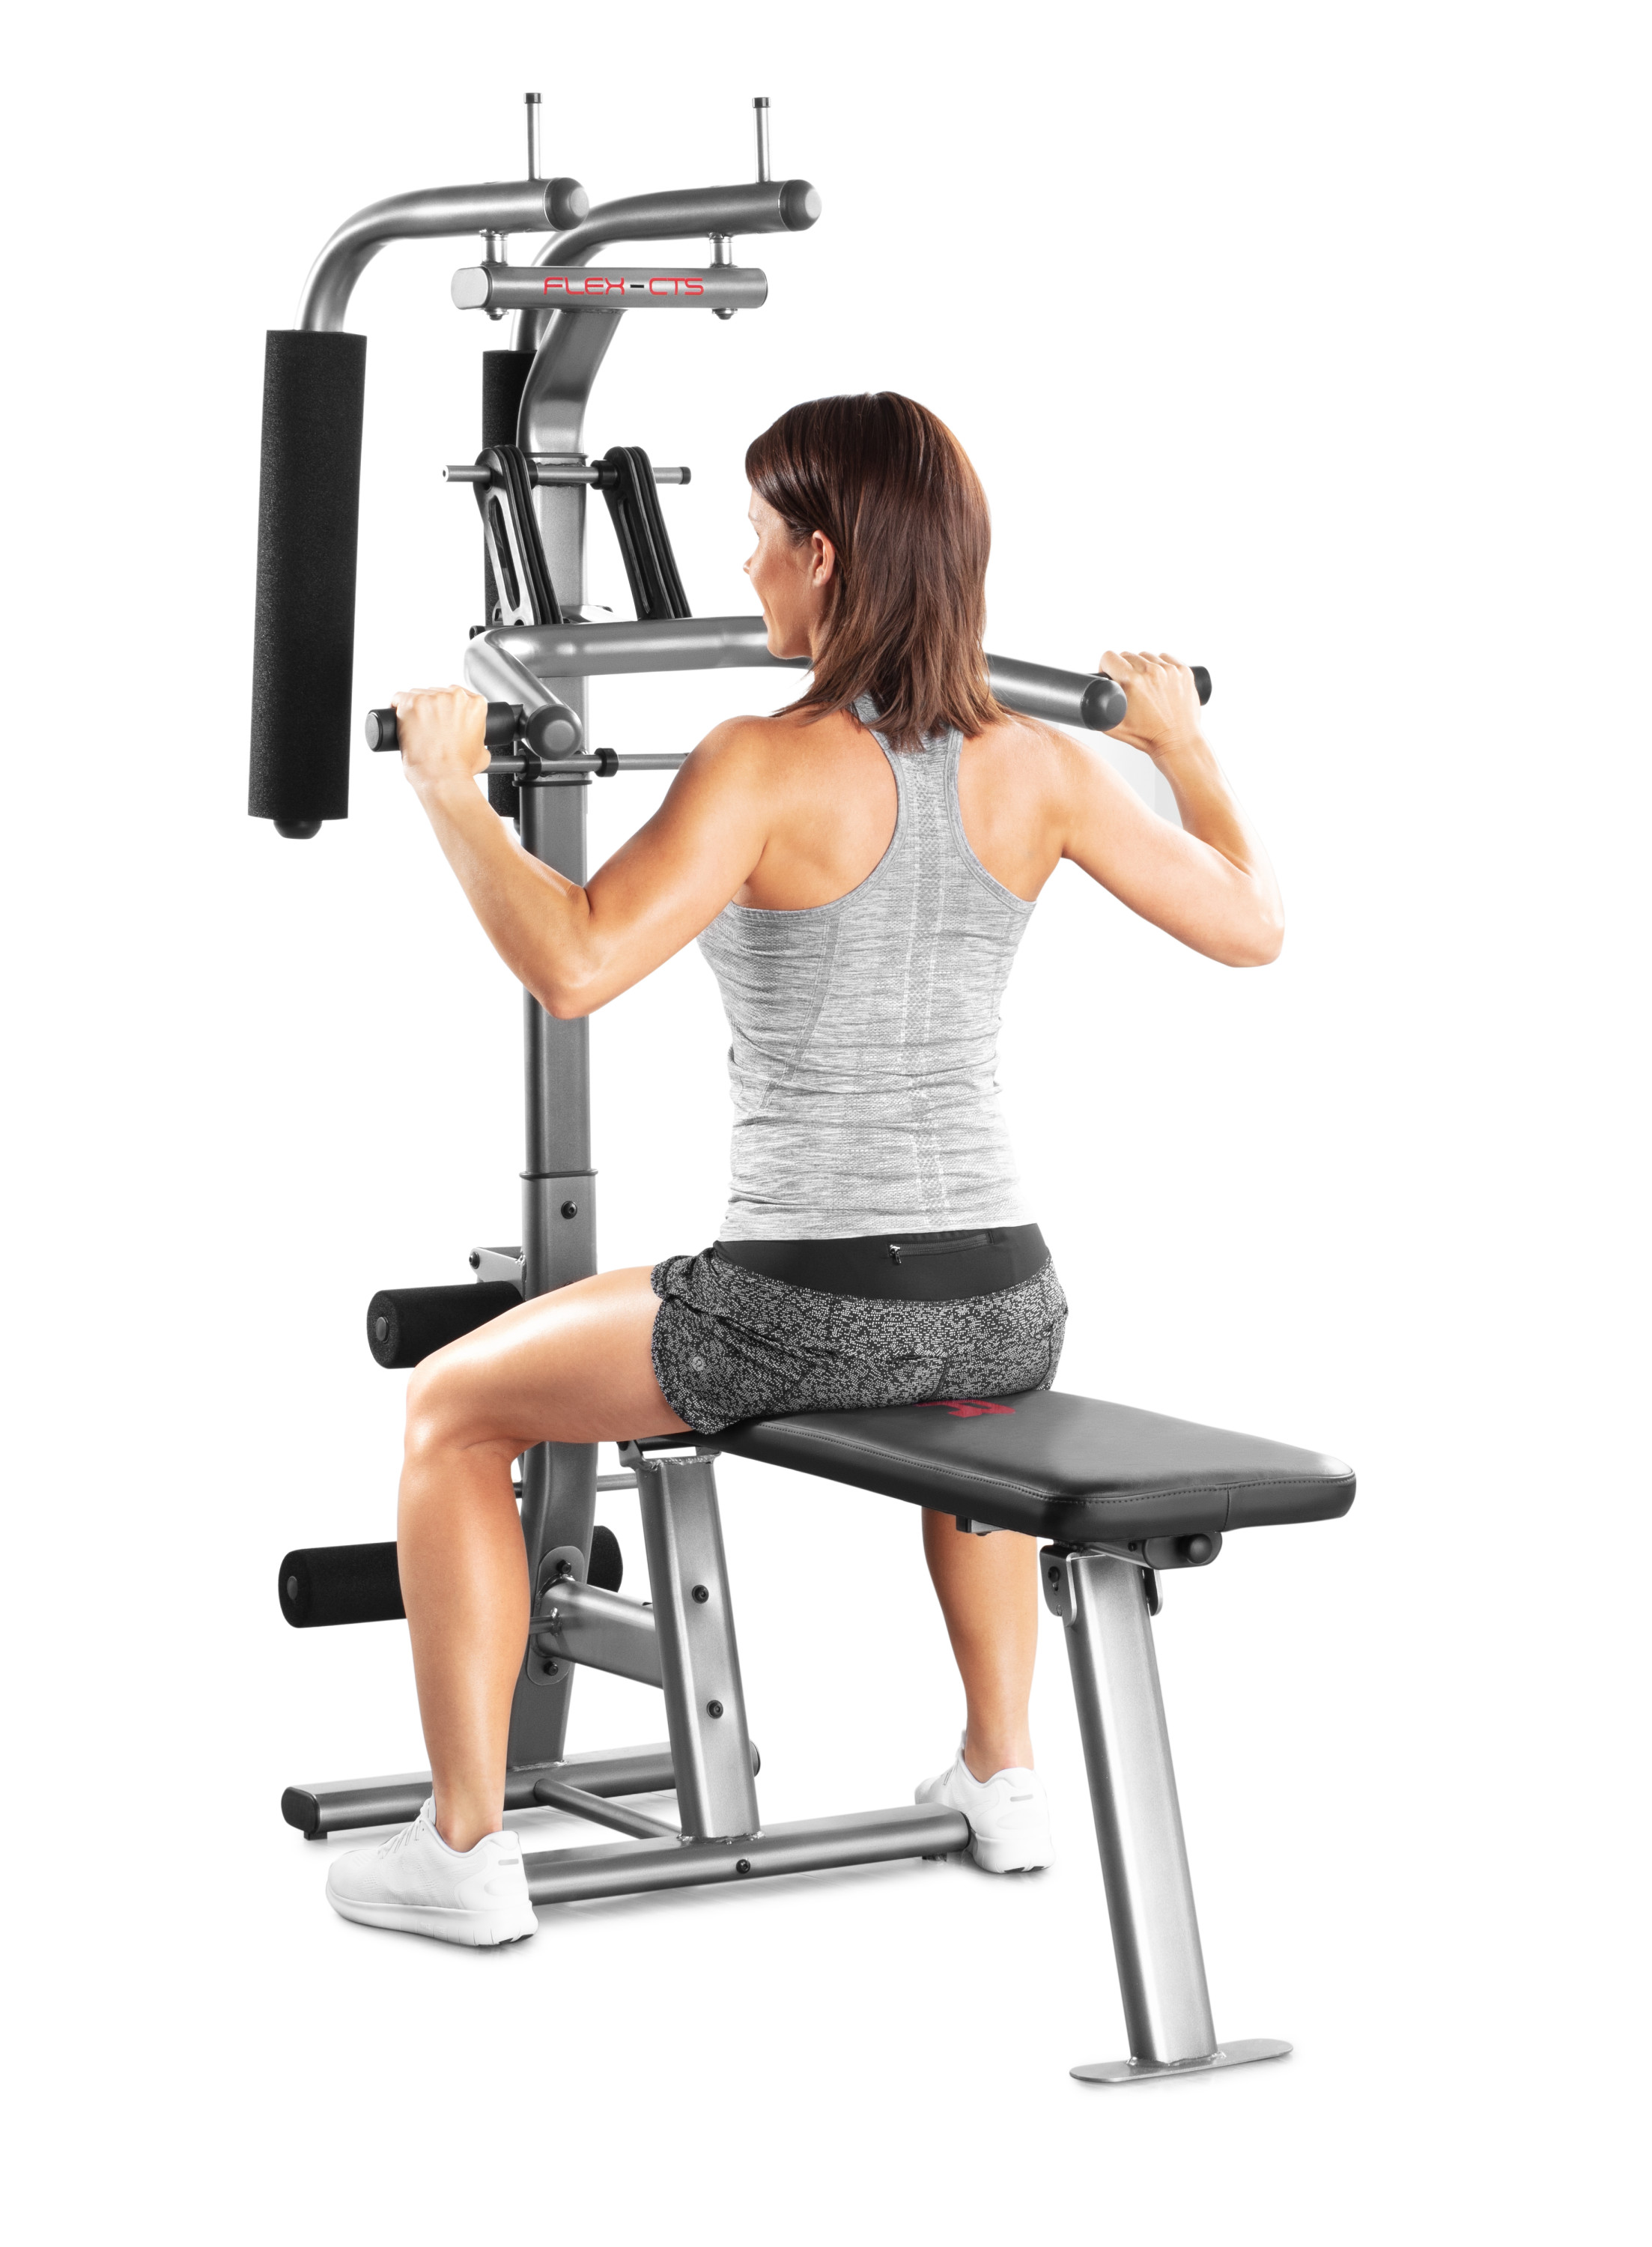 Weider Flex CTS Home Gym System with 14 Resistance Bands and Professionally-Designed Excercise Chart - image 8 of 11